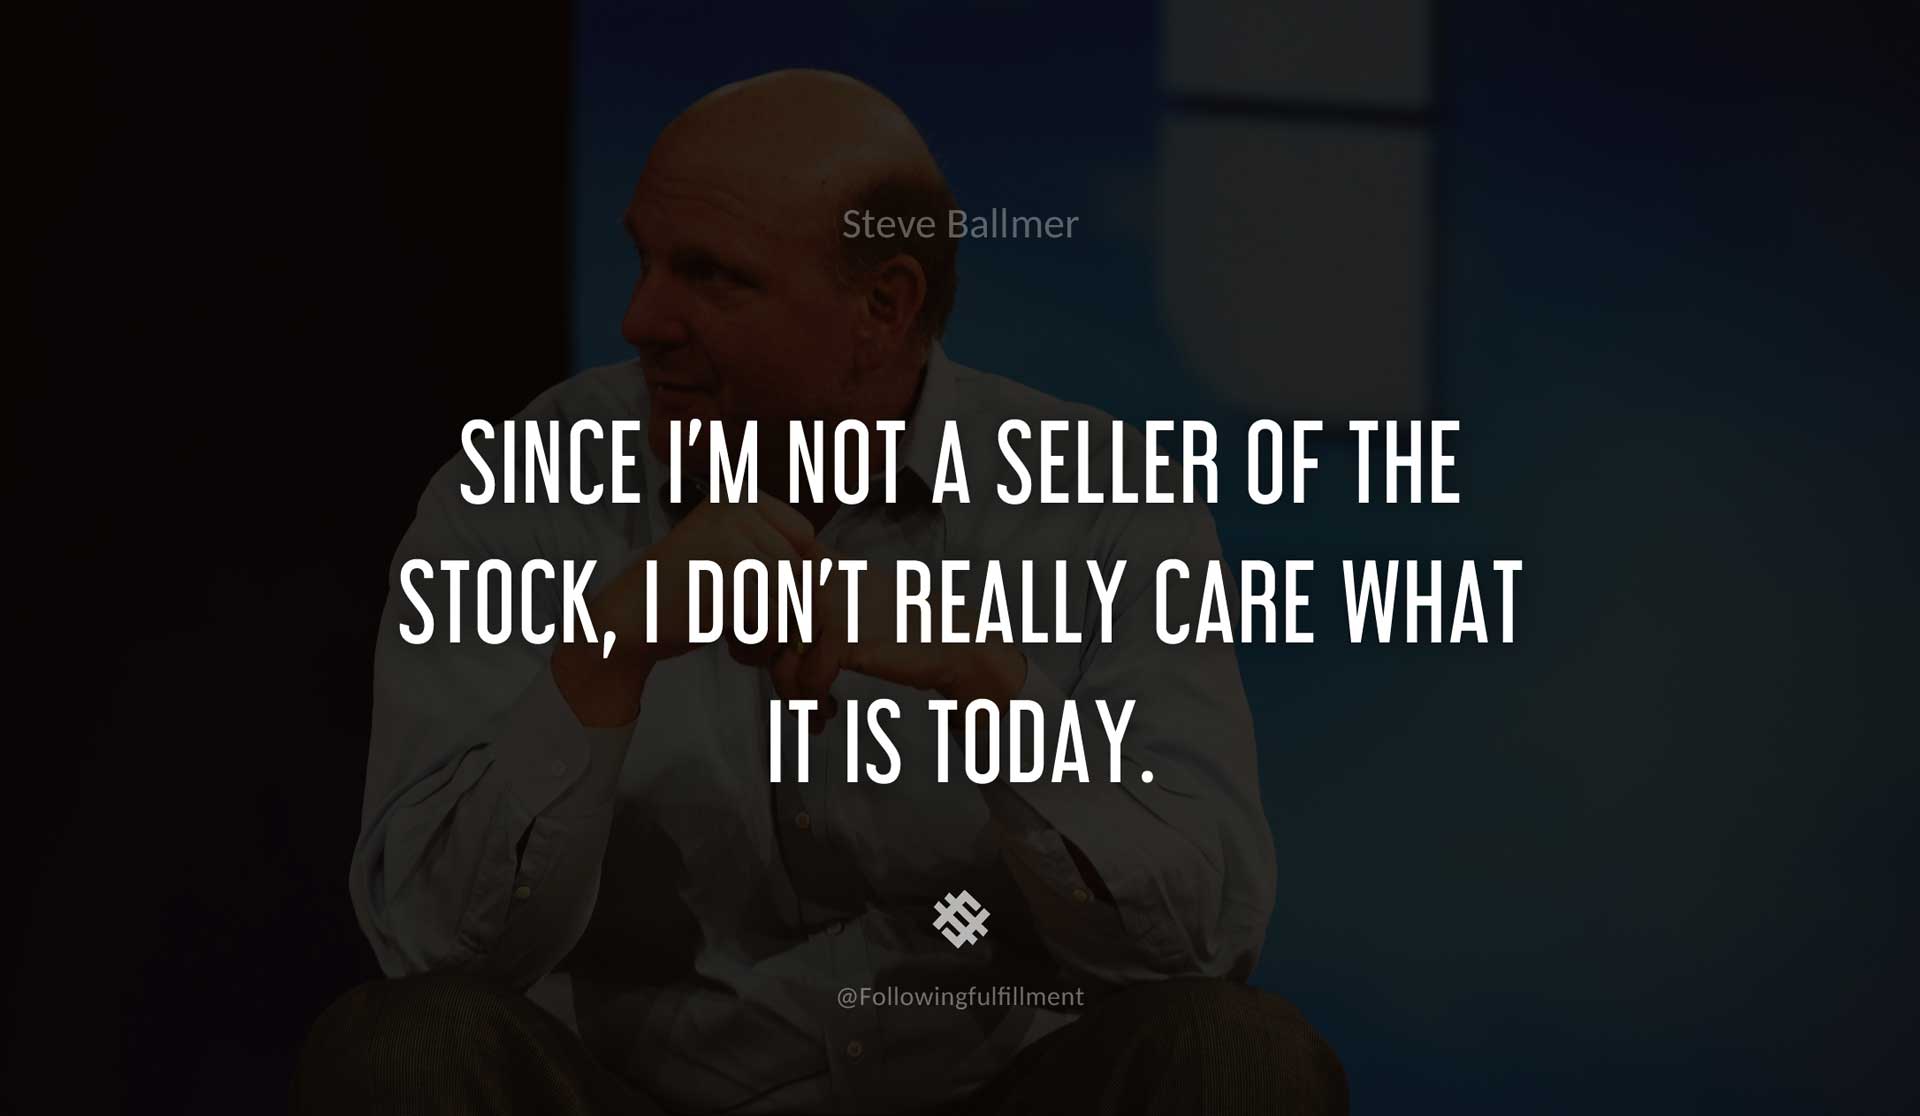 Since-I'm-not-a-seller-of-the-stock,-I-don't-really-care-what-it-is-today.-STEVE-BALLMER-Quote.jpg